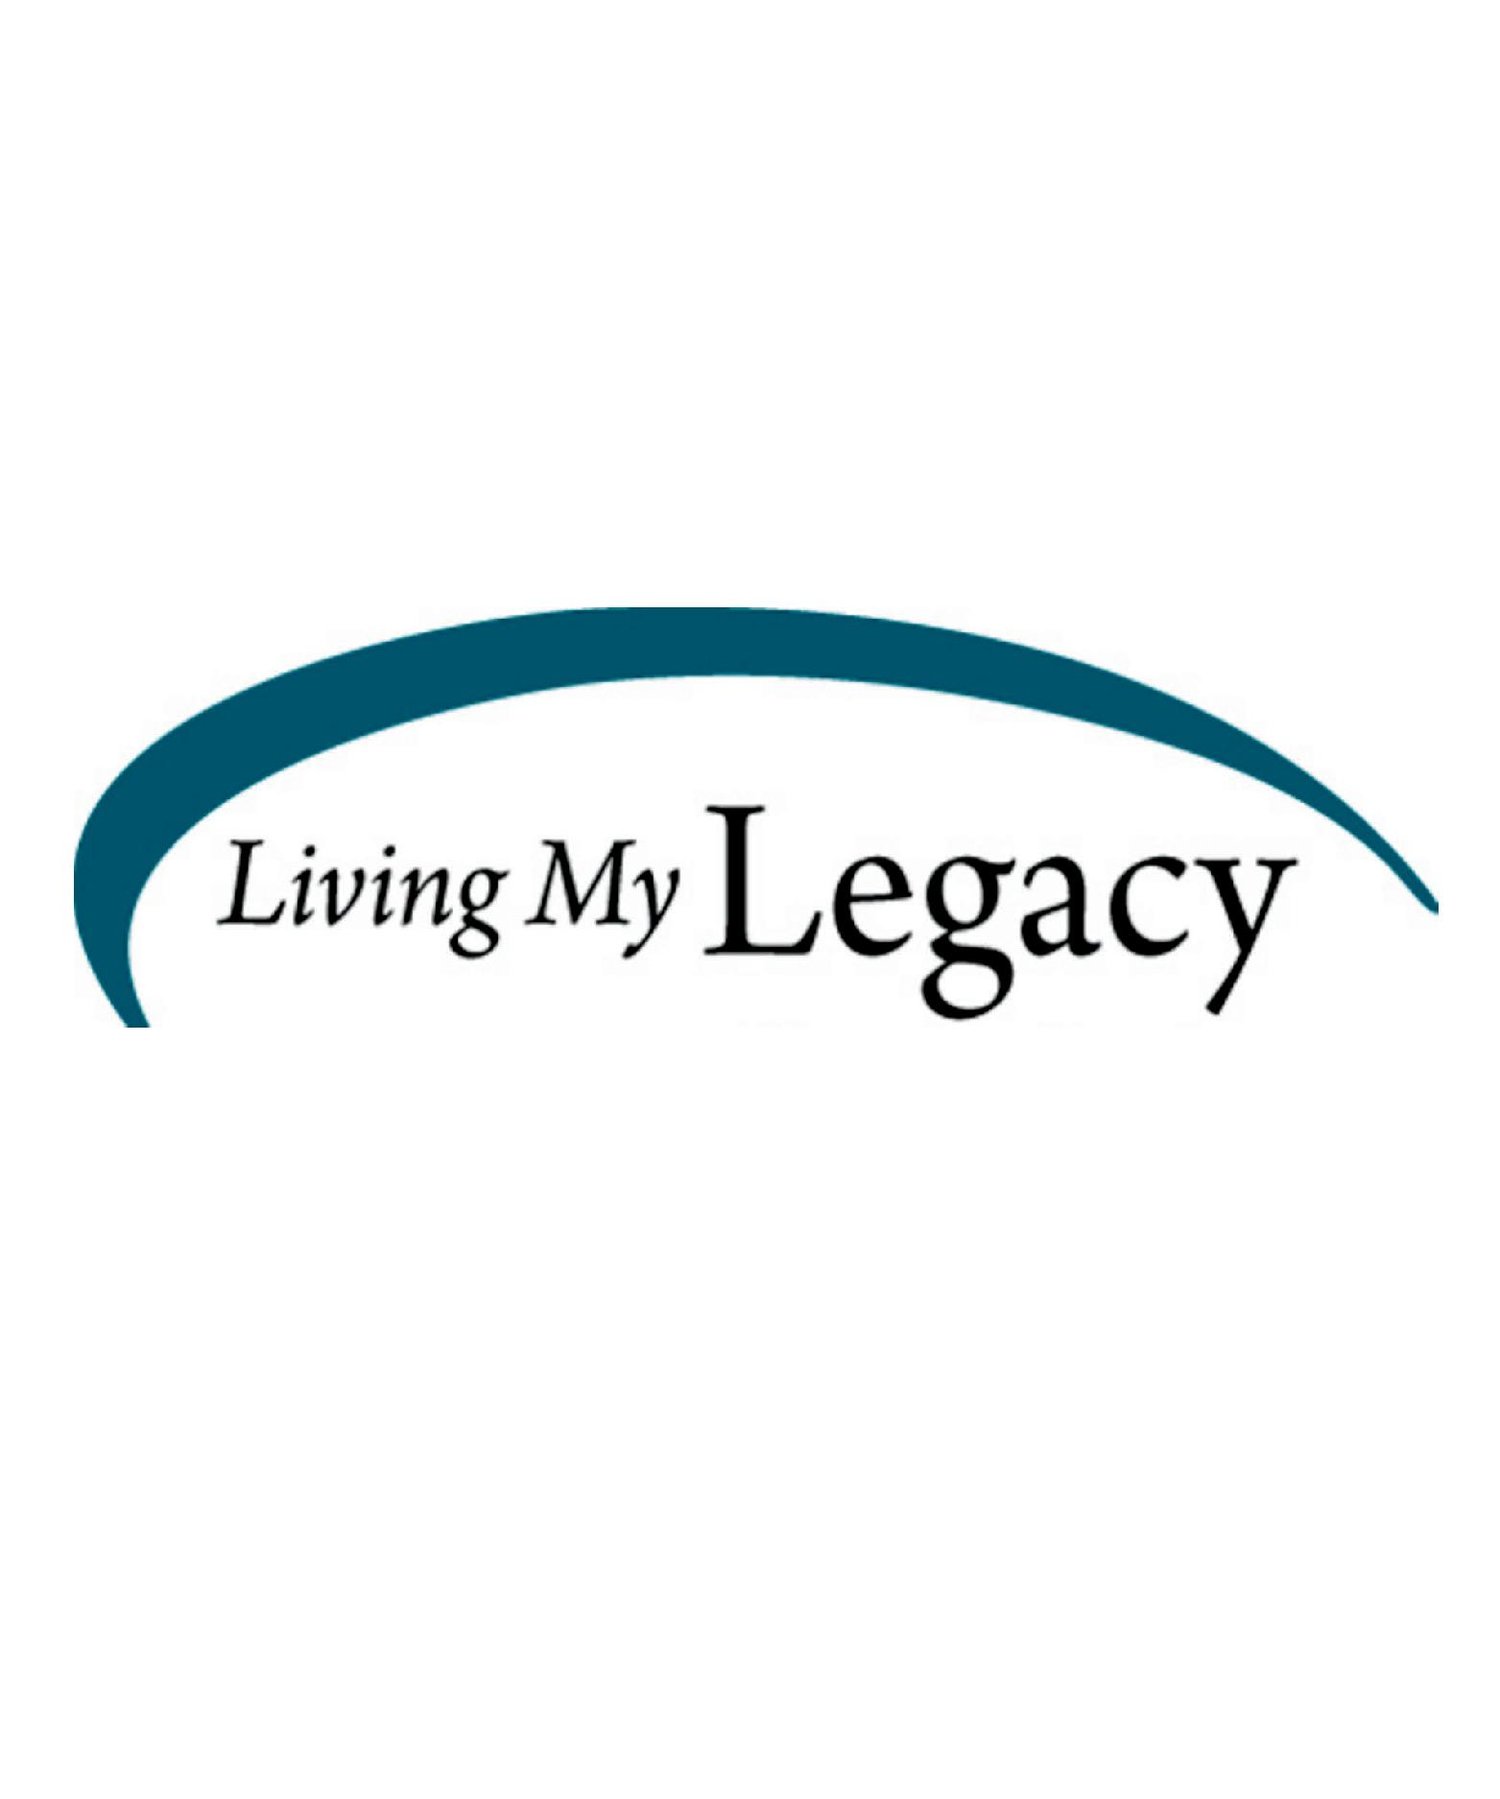 Living My Legacy creates customized solutions for families to successfully transition wealth, stories, values, vision, and leadership from one generation to the next.